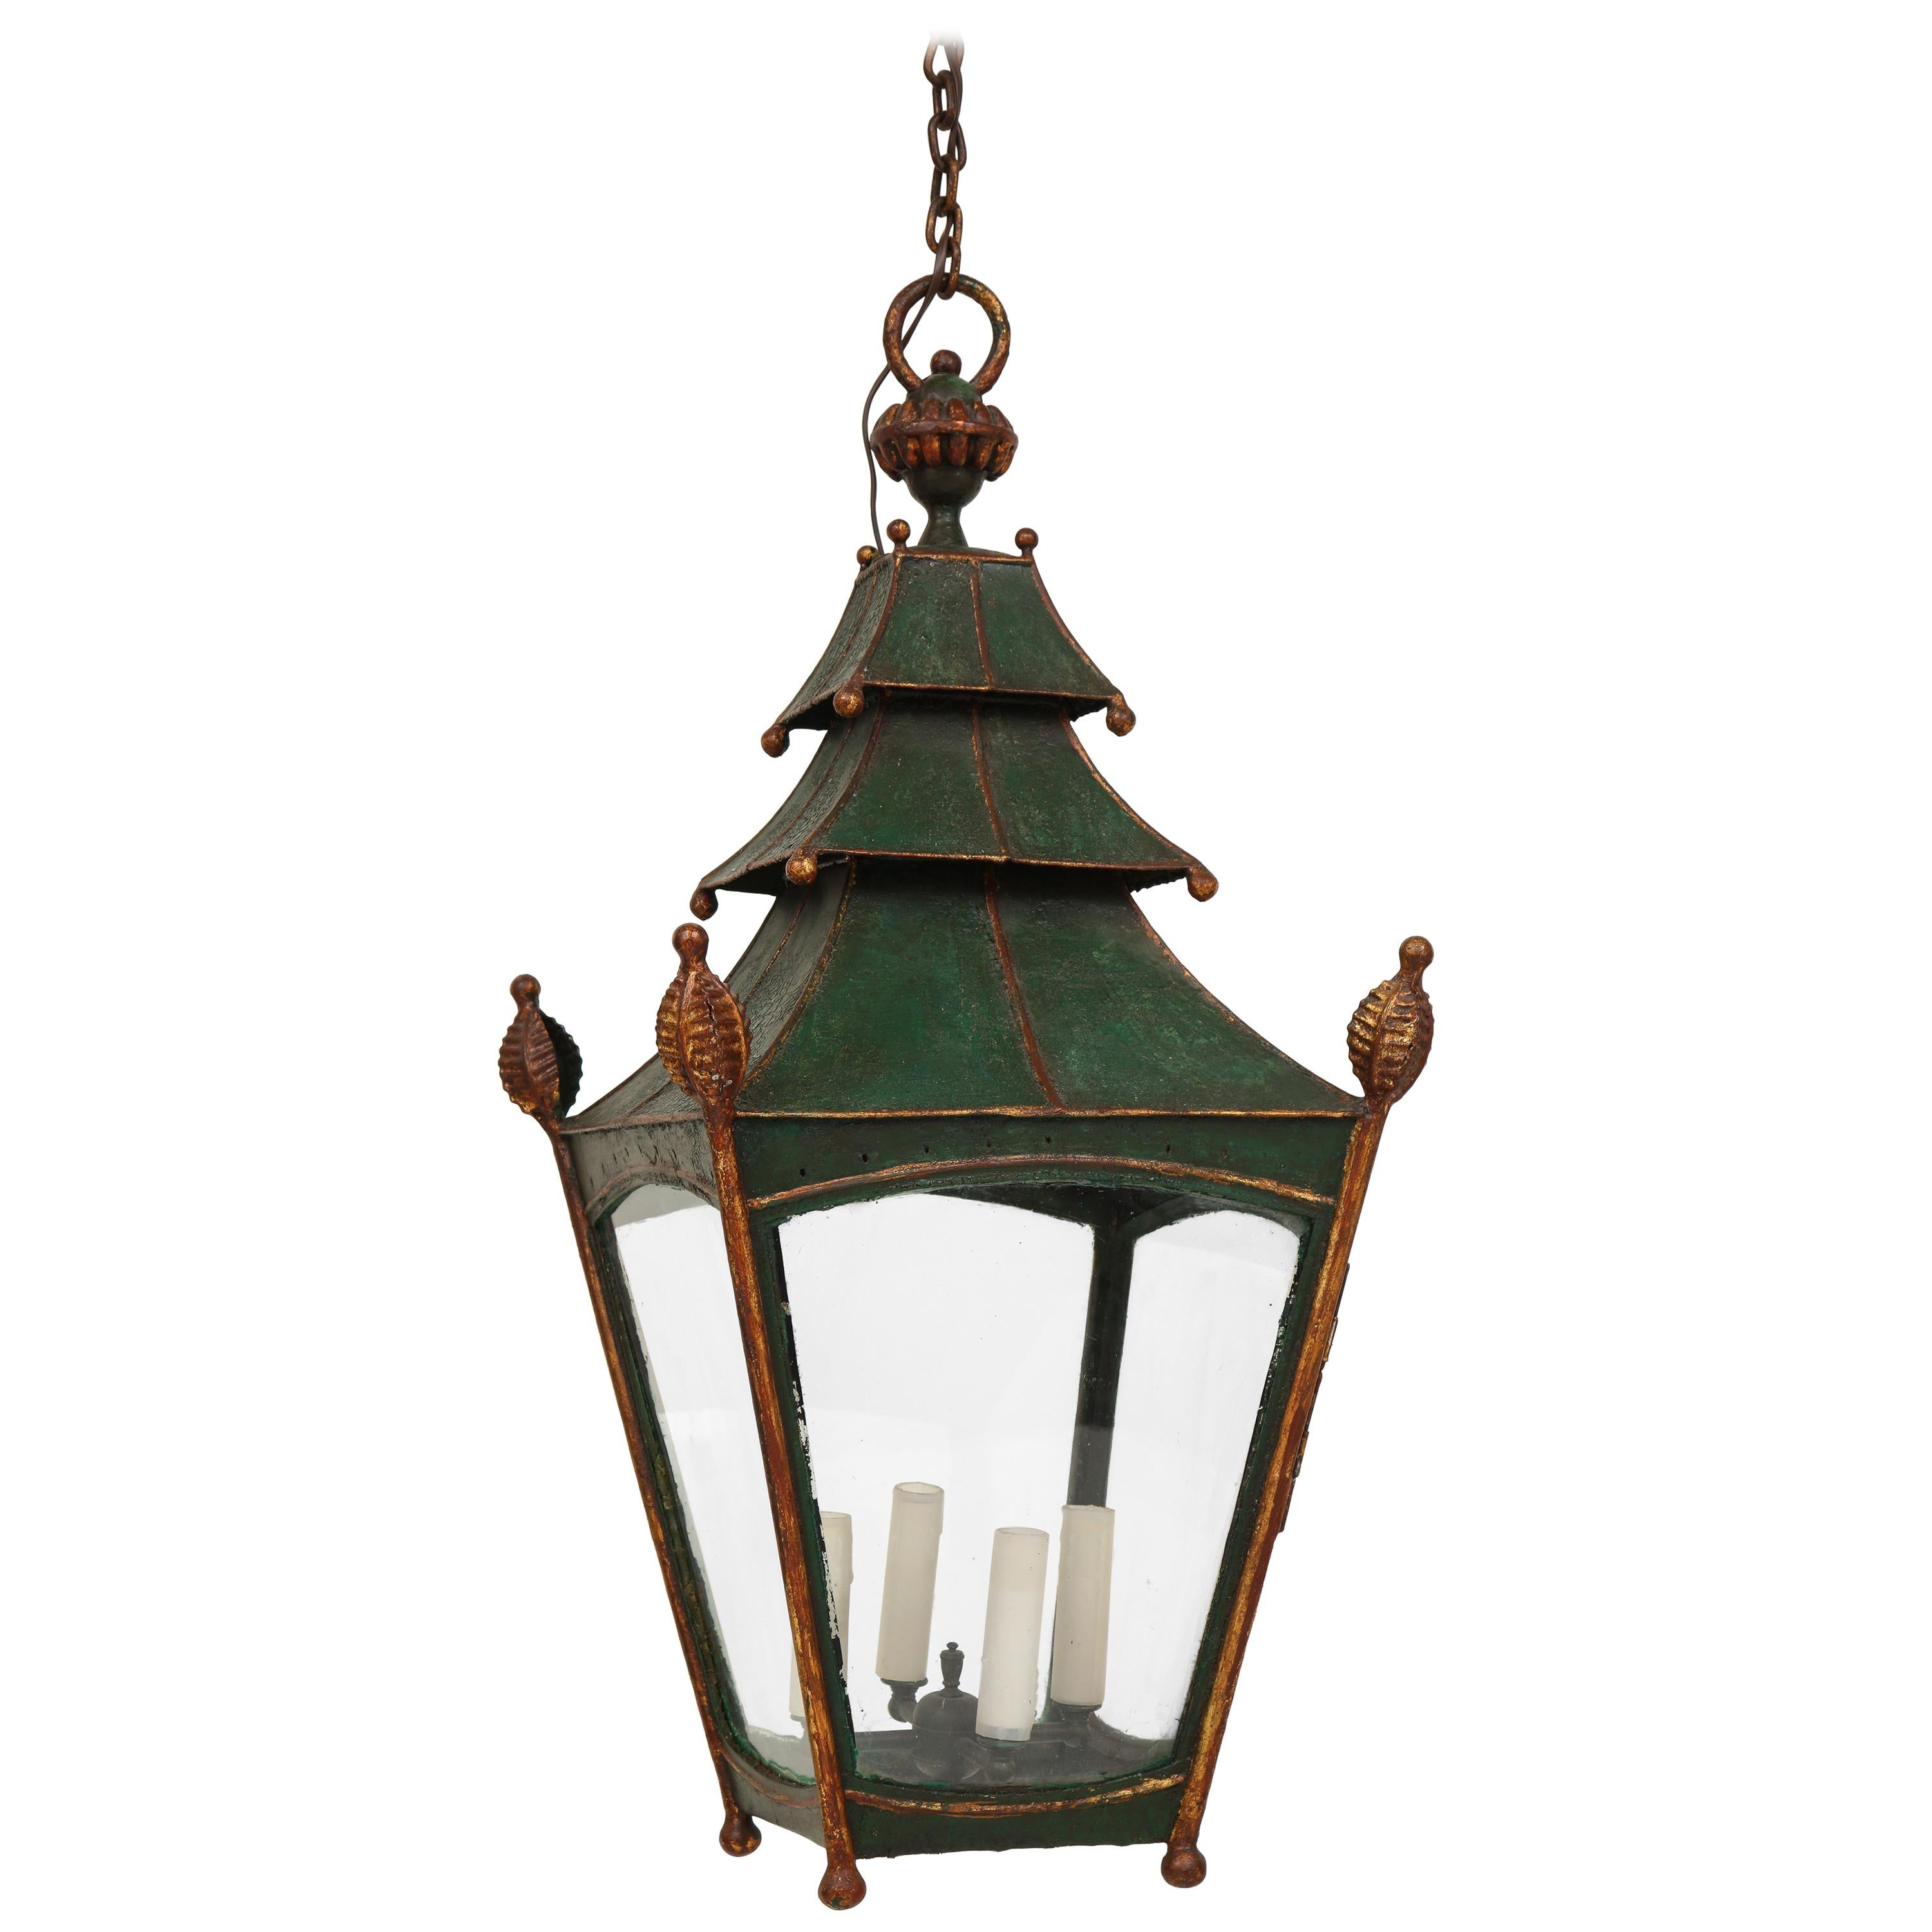 19th Century French Green and Gilt Tôle Lantern